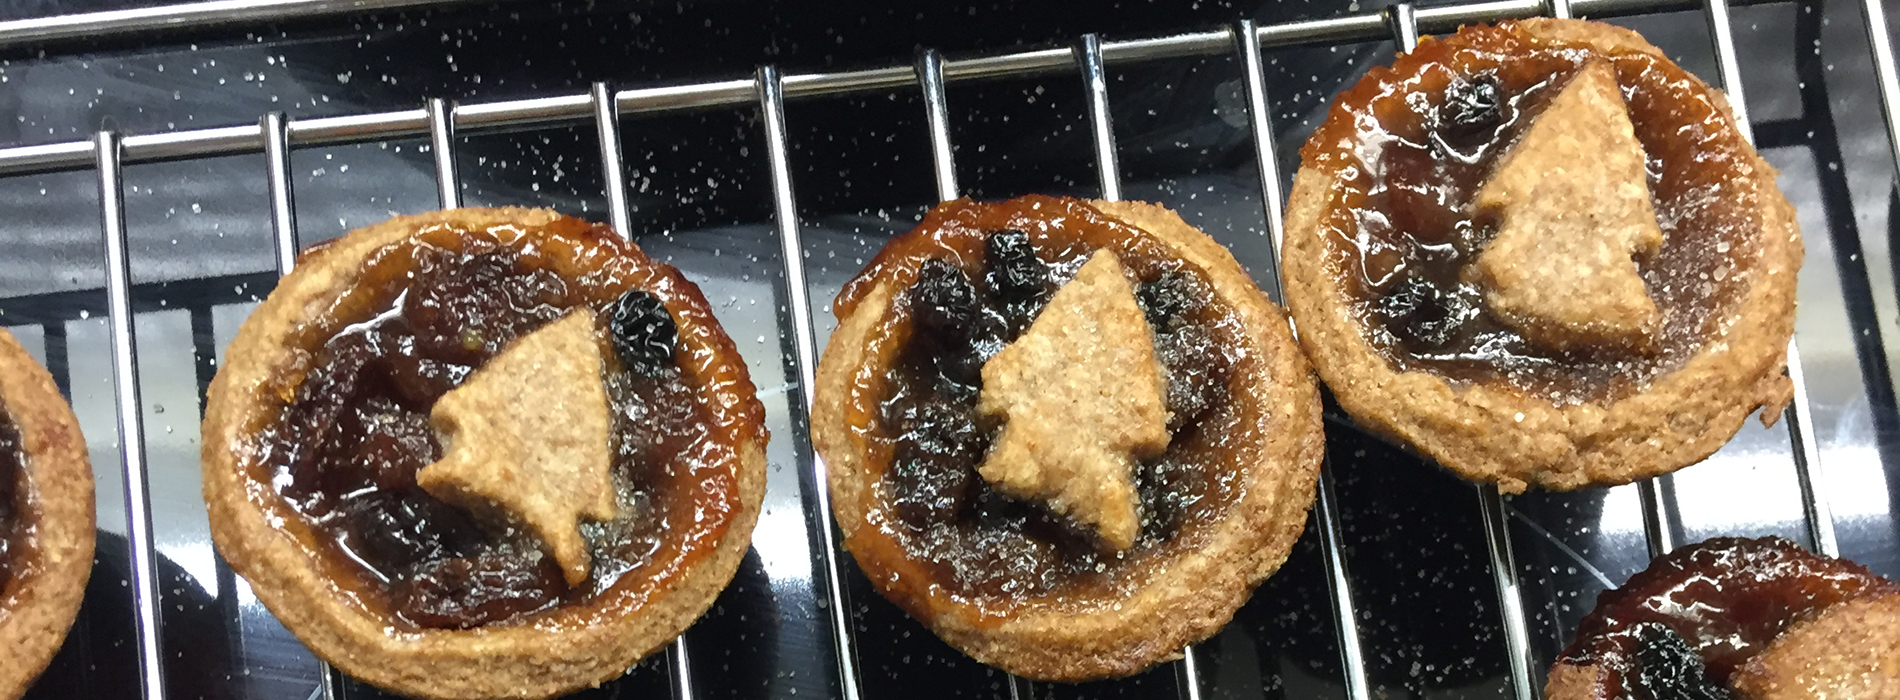 Small wholemeal mince pies